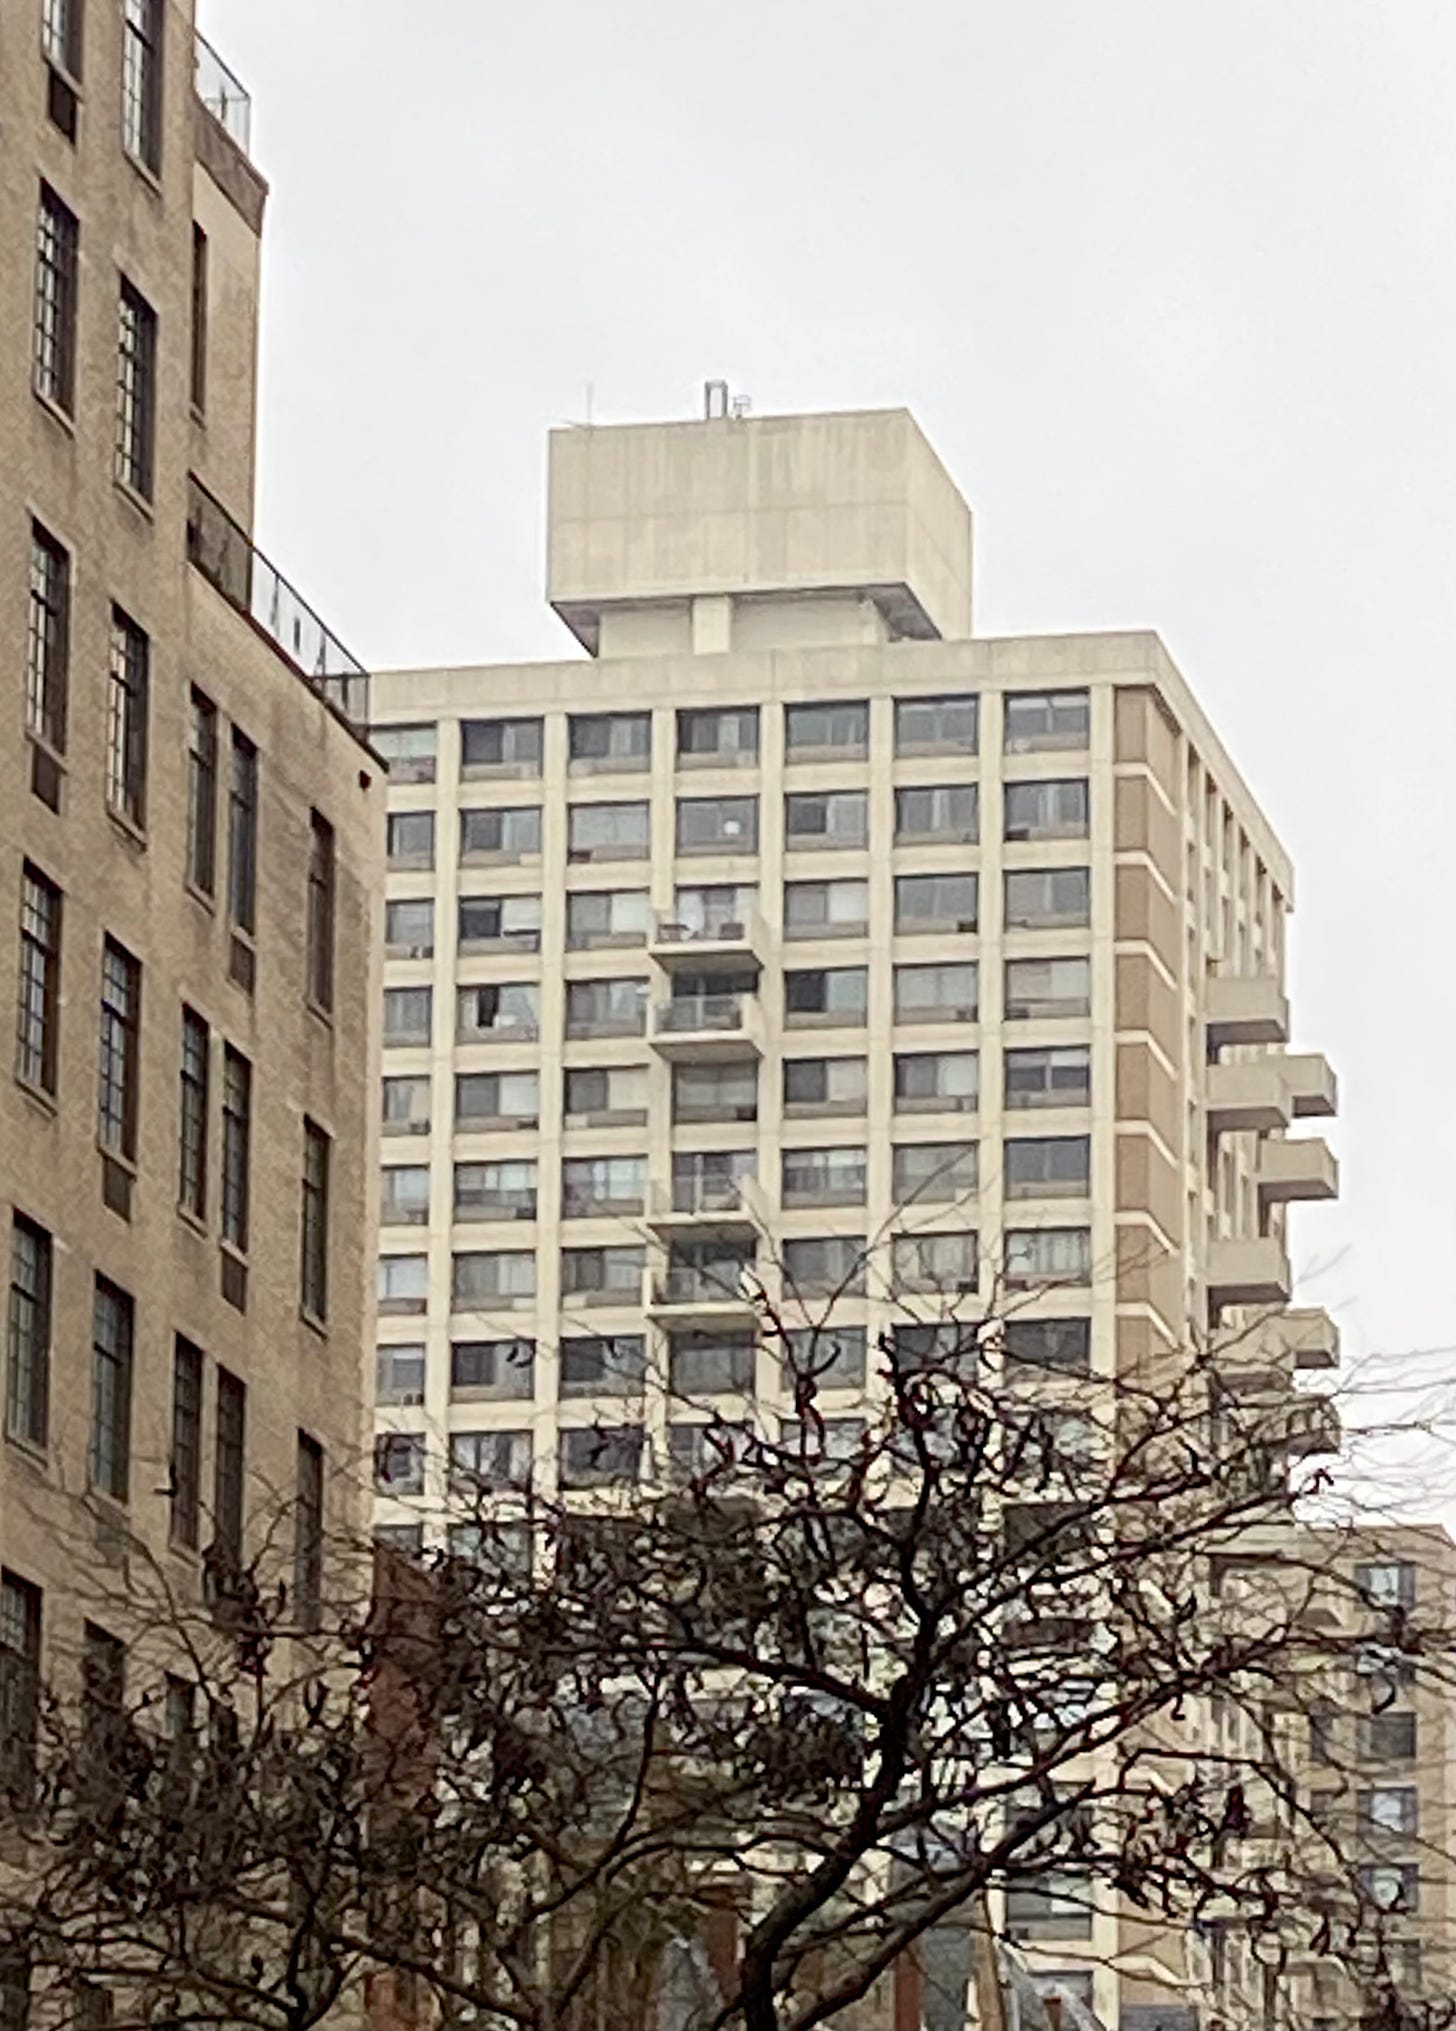 A white box of a building with an an opaque white box on top of it. The effect is a bit like a 1950s robot.